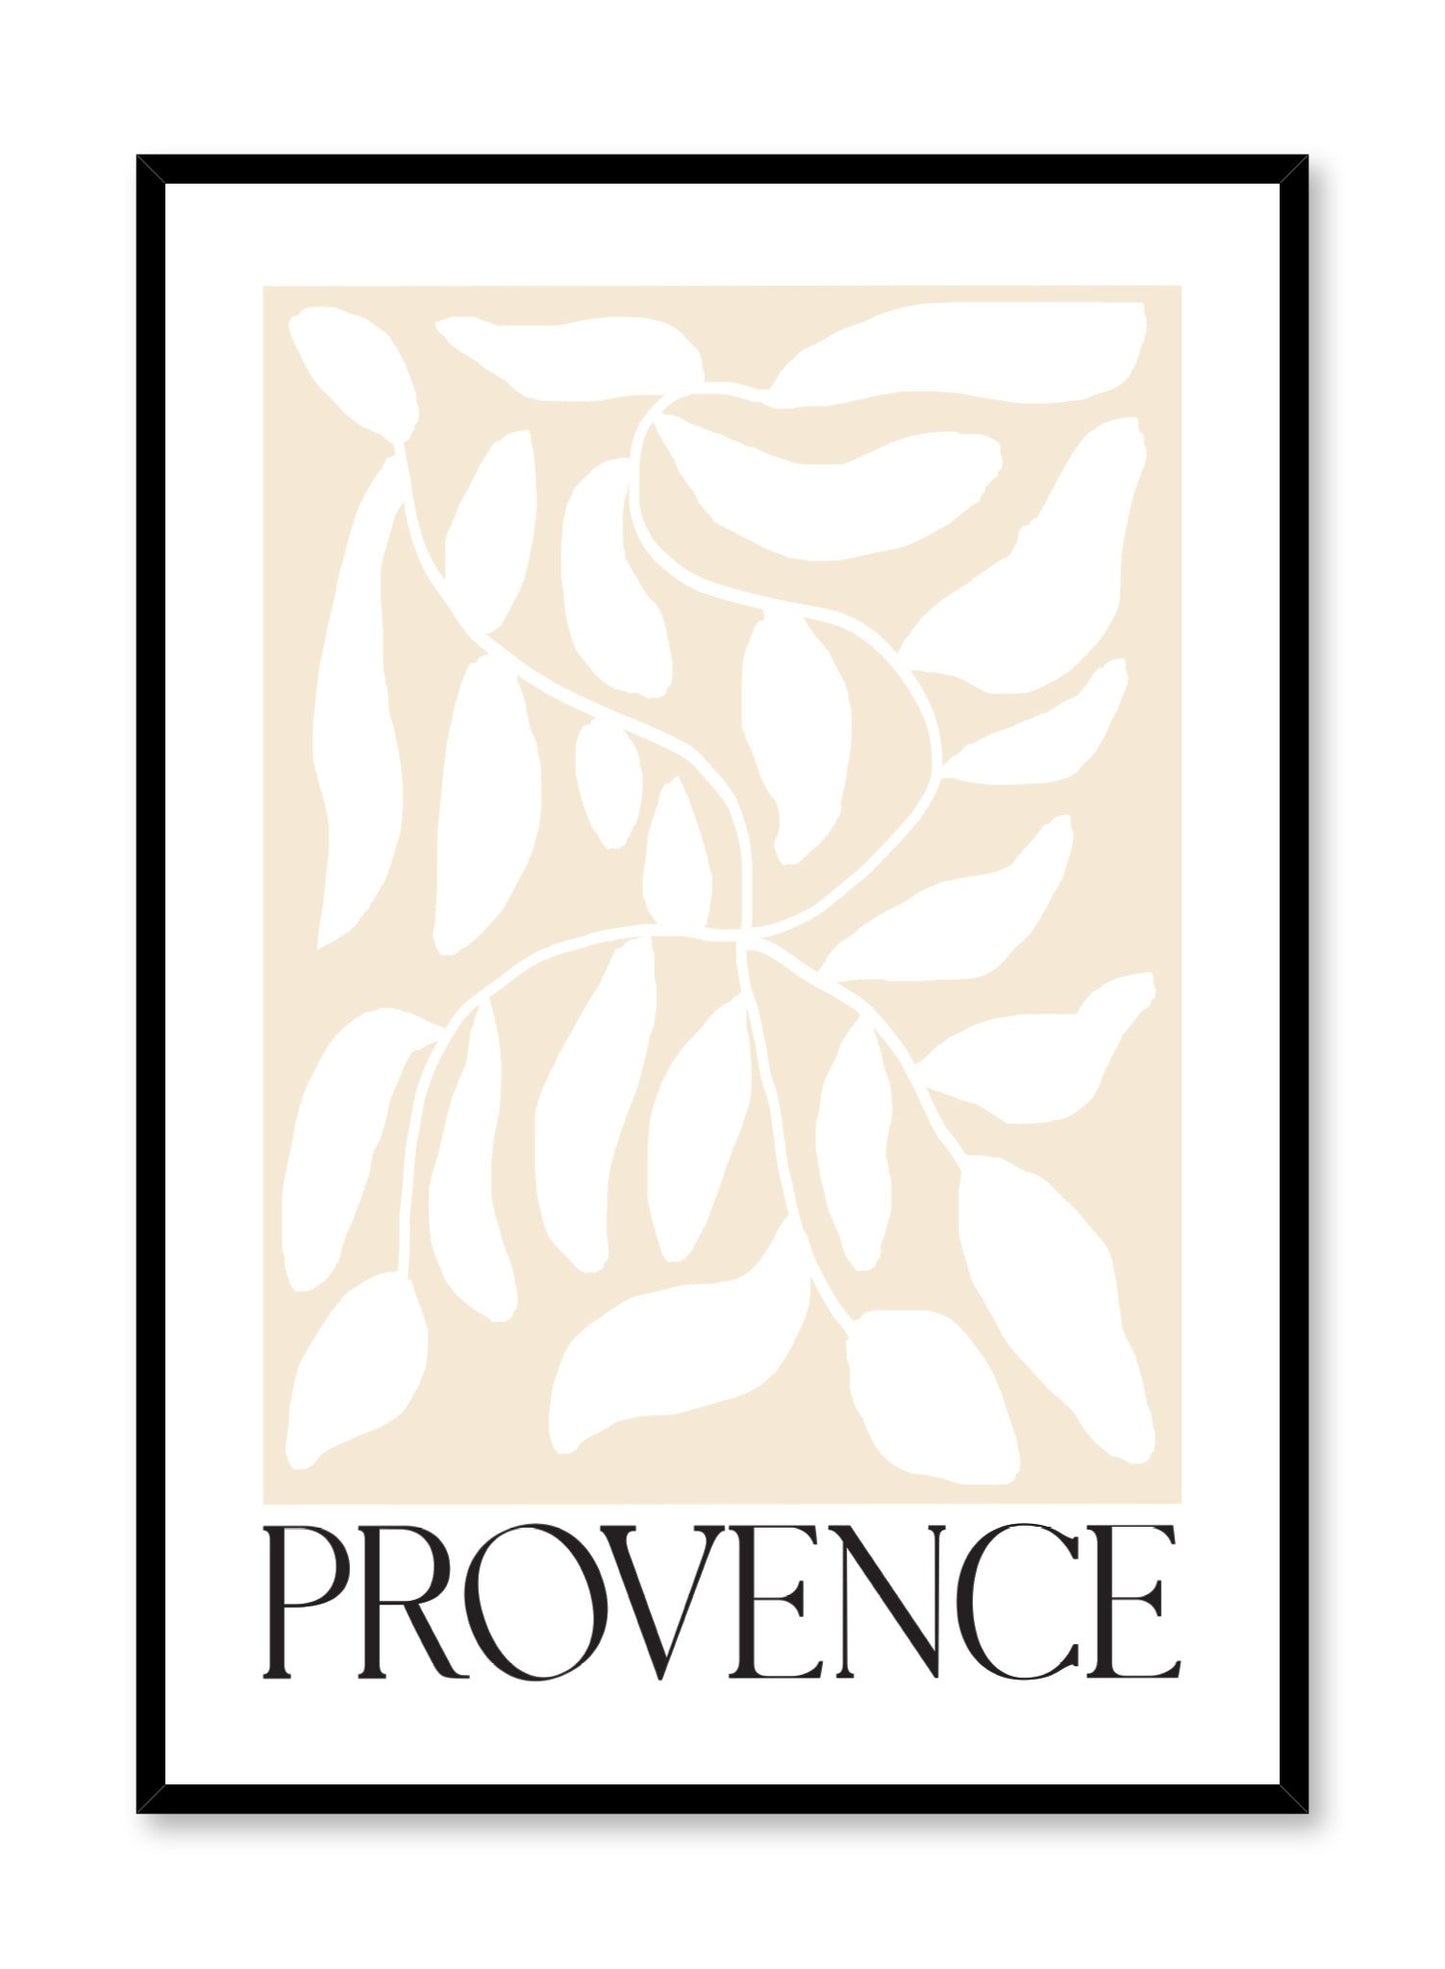 "Provence" is a minimalist  botanical illustration poster by Opposite Wall of vintage white leaves over a beige background and the a "Provence" typography print.